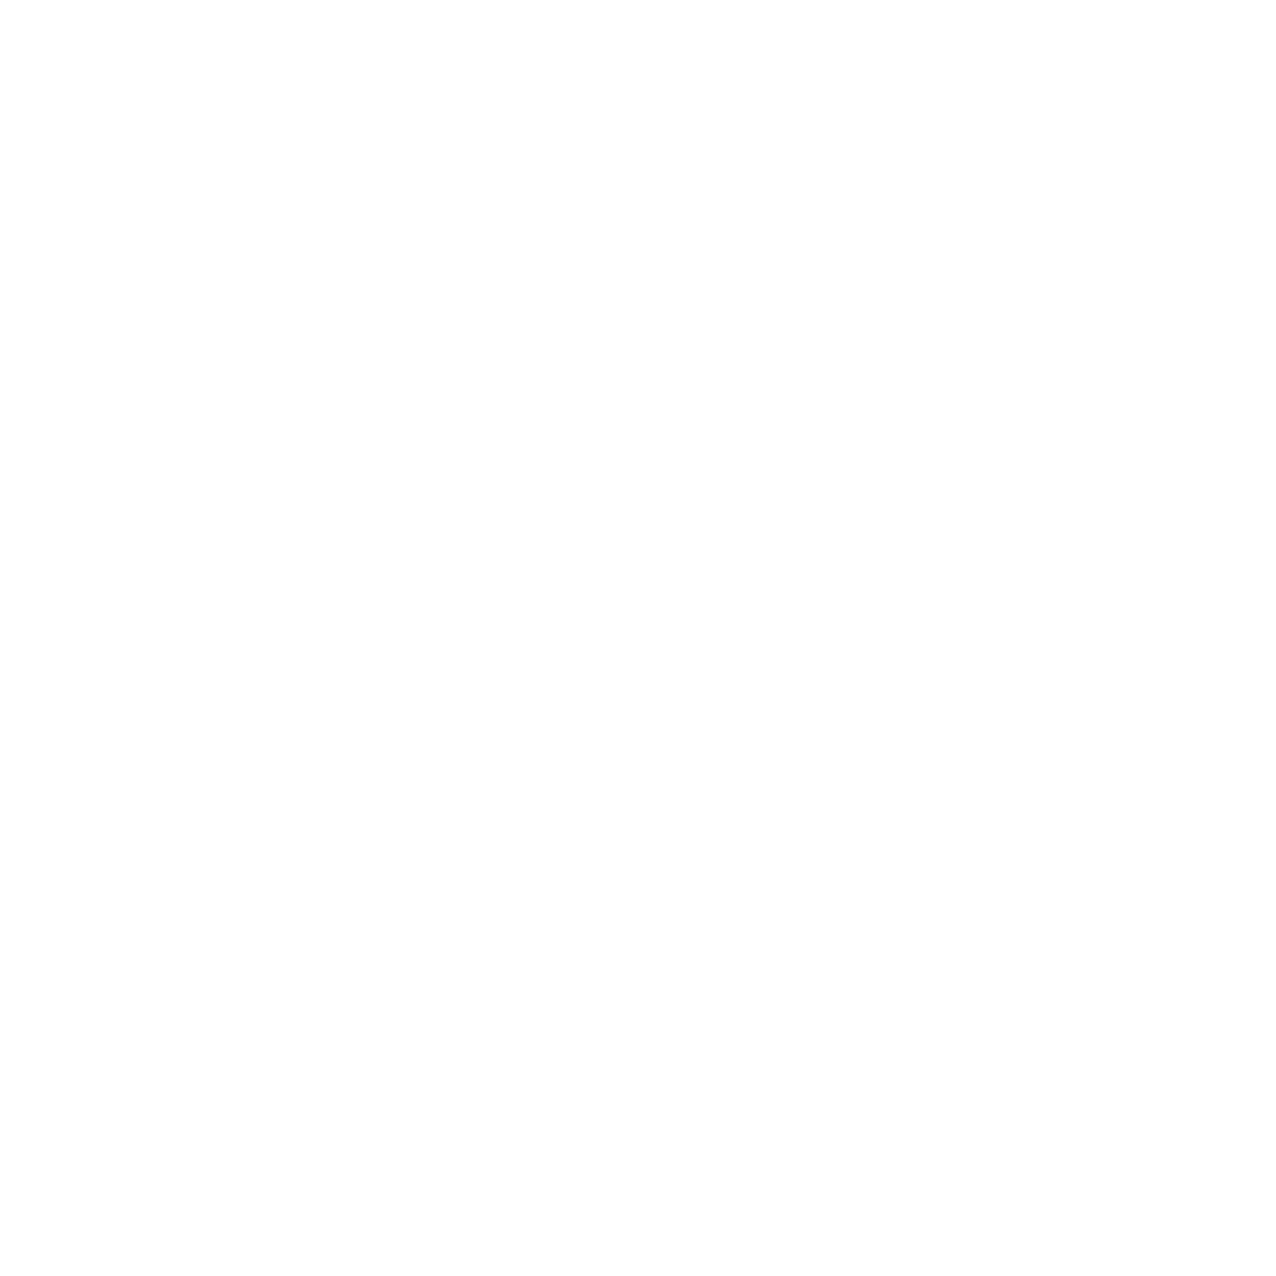 America’s Cleaning Services